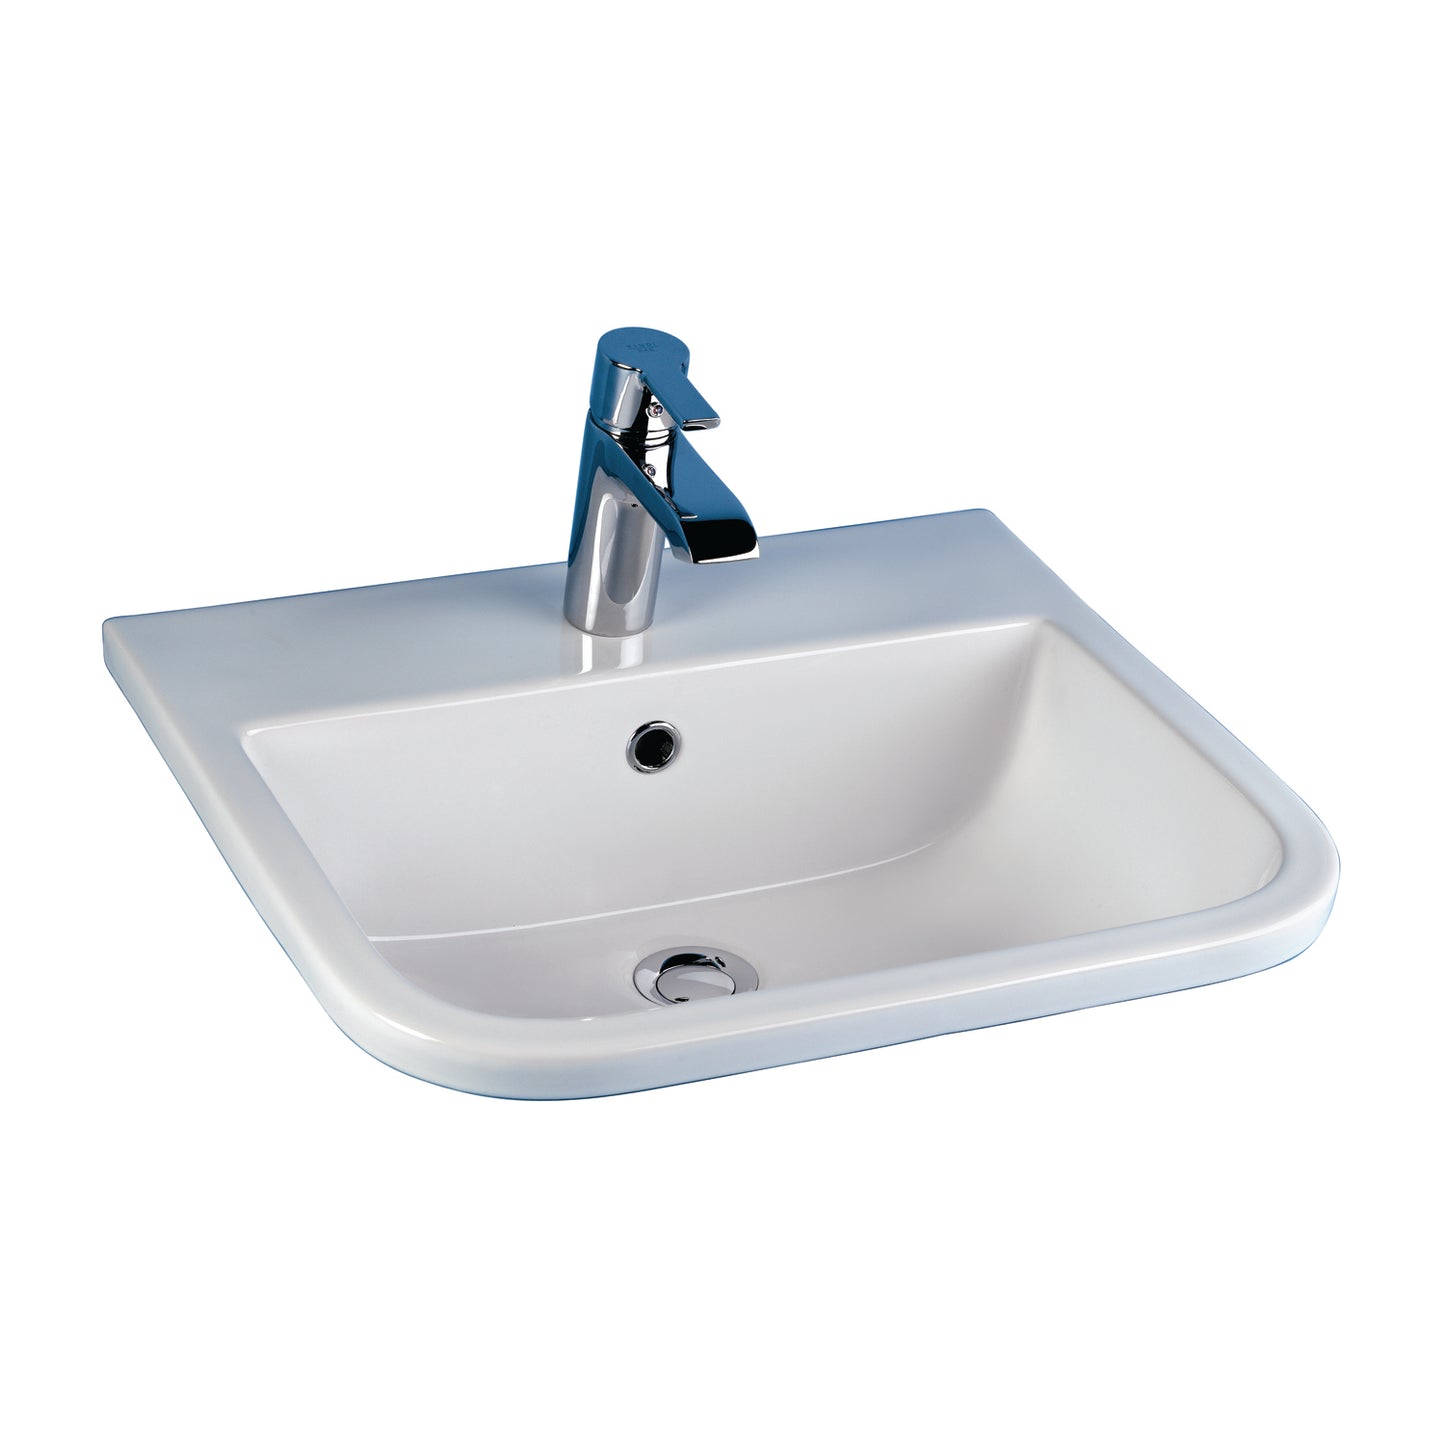 Series 600 20" Drop In Lavatory Sink with 1 Faucet Hole White